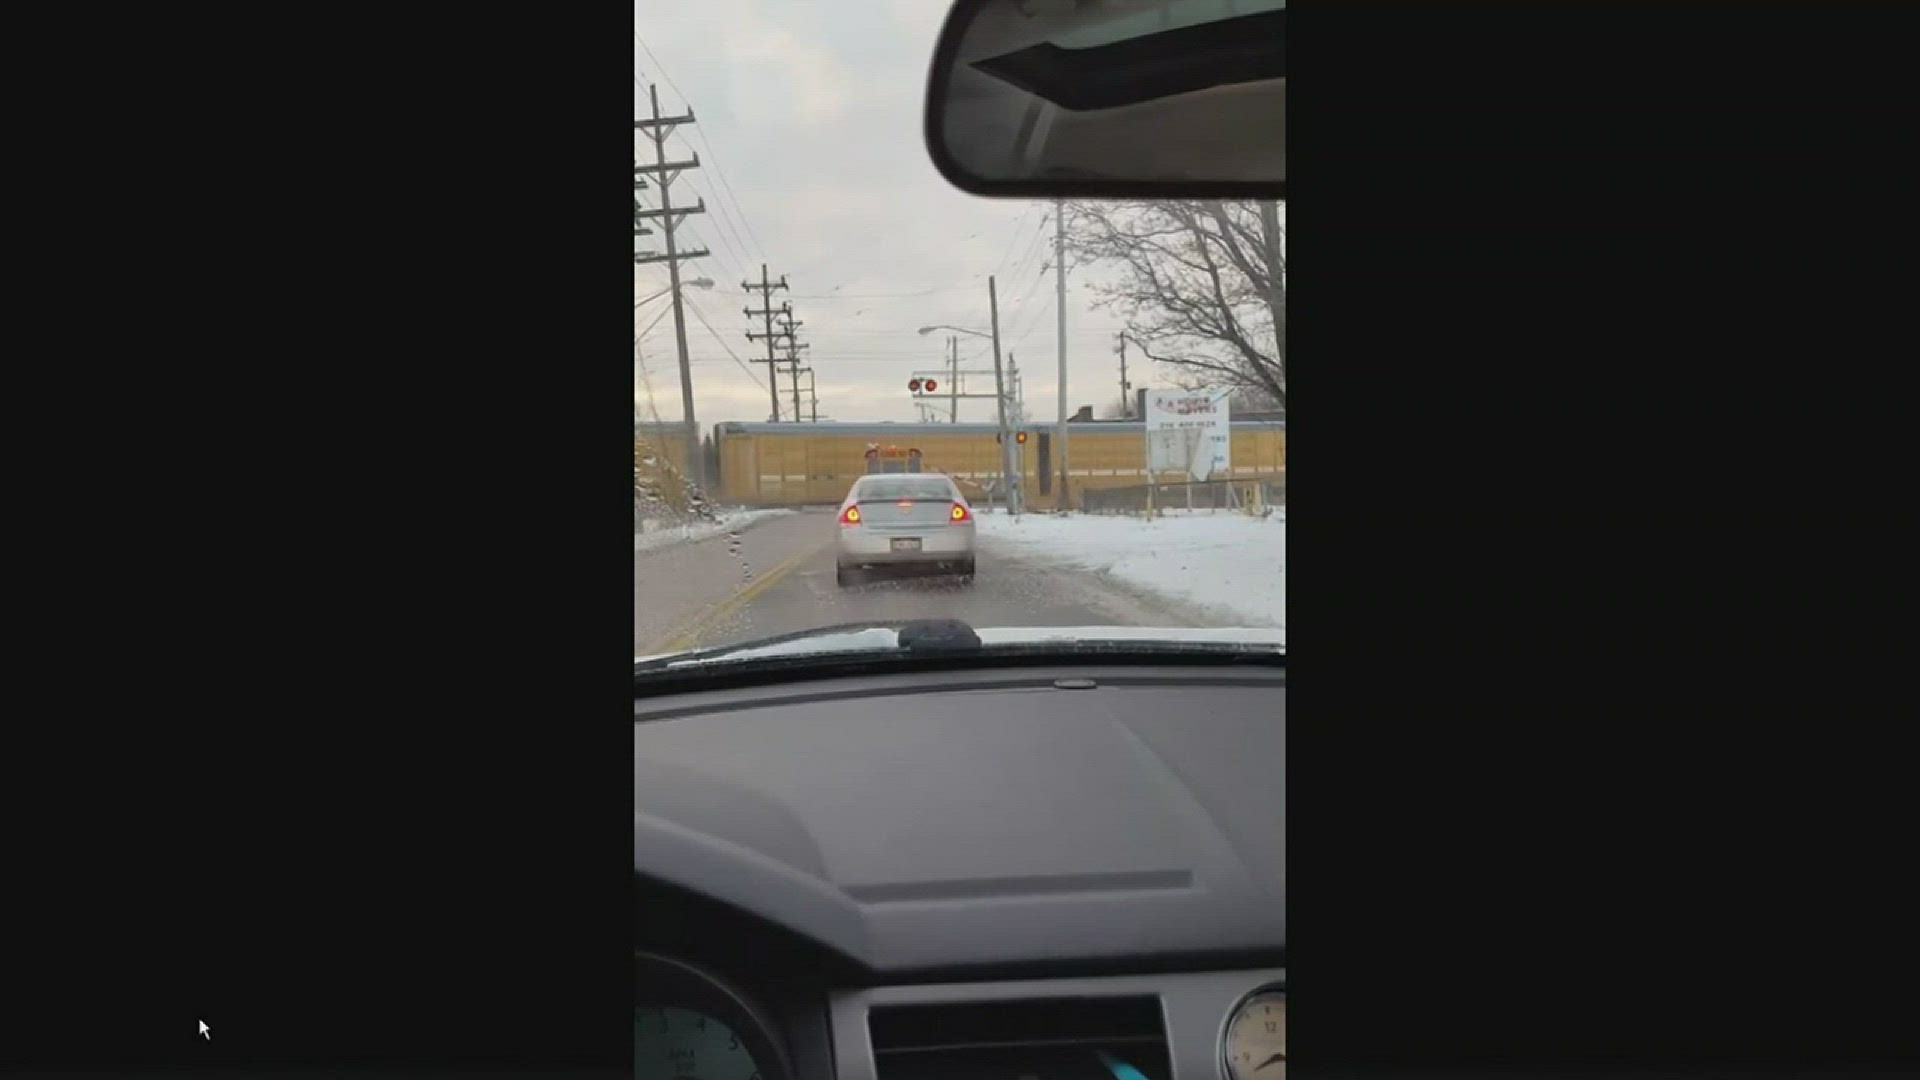 Jan. 17, 2018: Video sent to WKYC this morning shows a school bus stuck underneath a railroad crossing gate as a train speeds by. The woman who recorded the footage tells WKYC there were students on board the bus, which she spotted stuck under the gate on